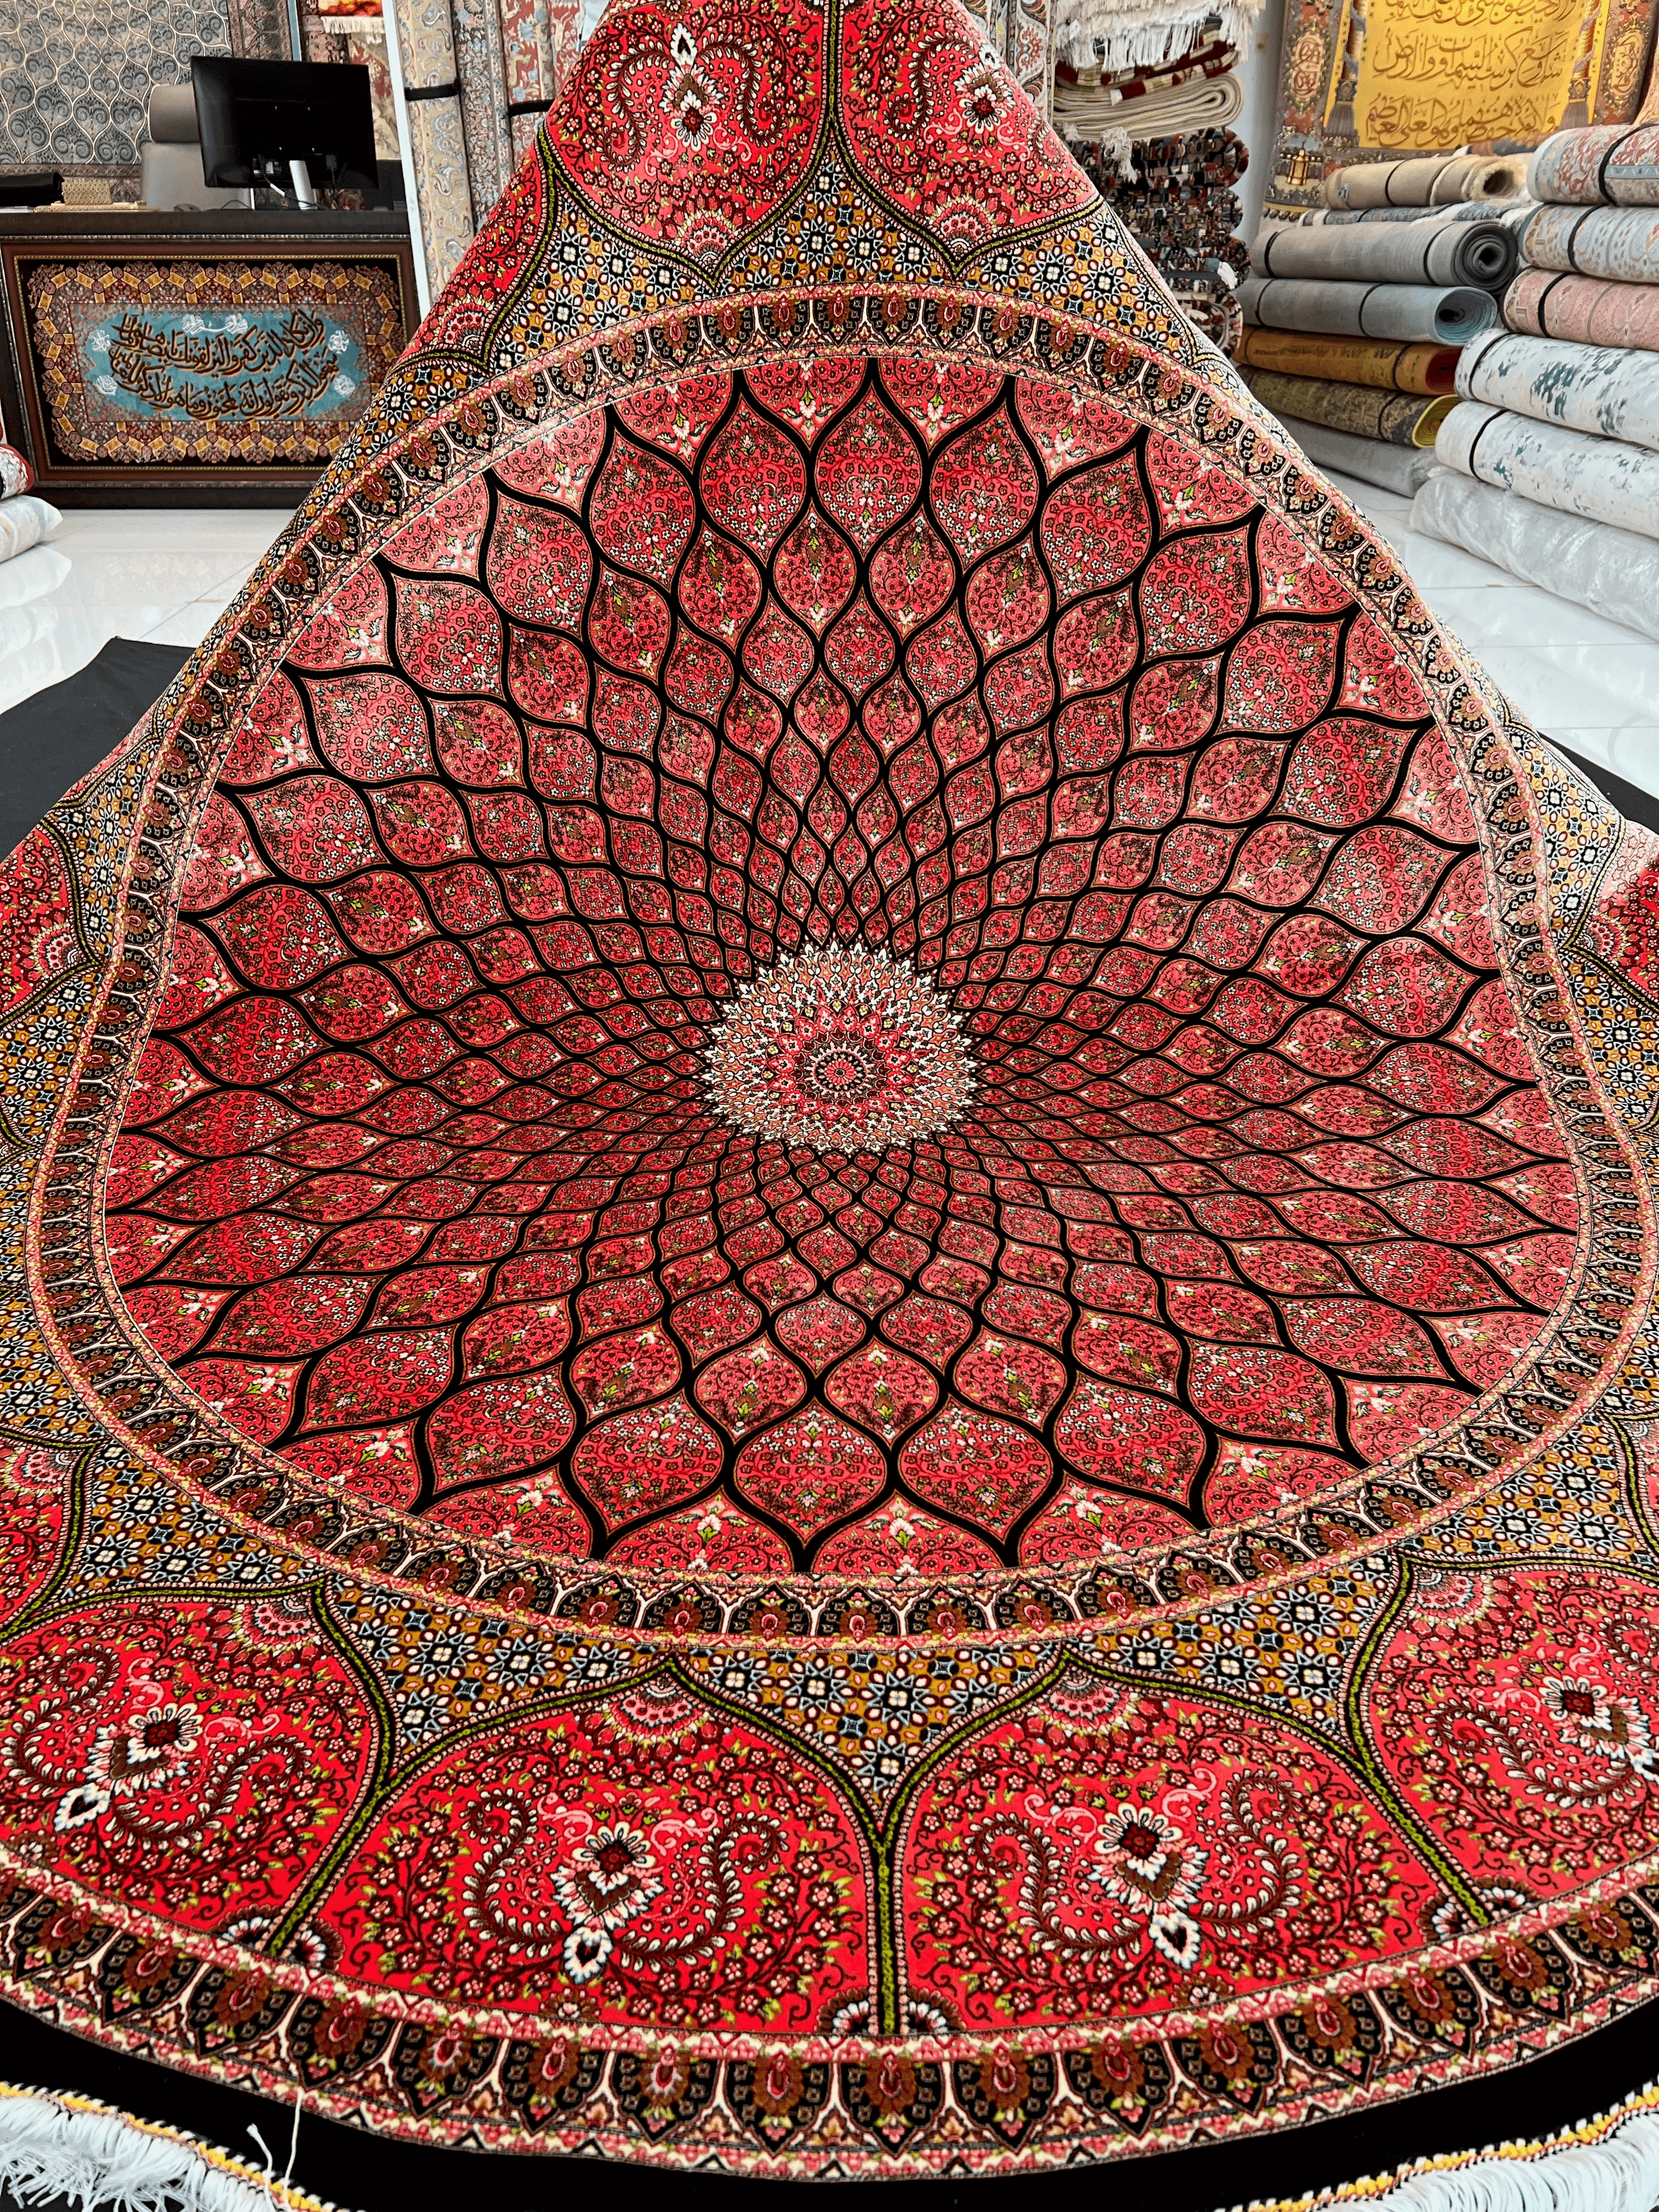 Round Fiery Sunset Dome "Gonbad" Area Rug